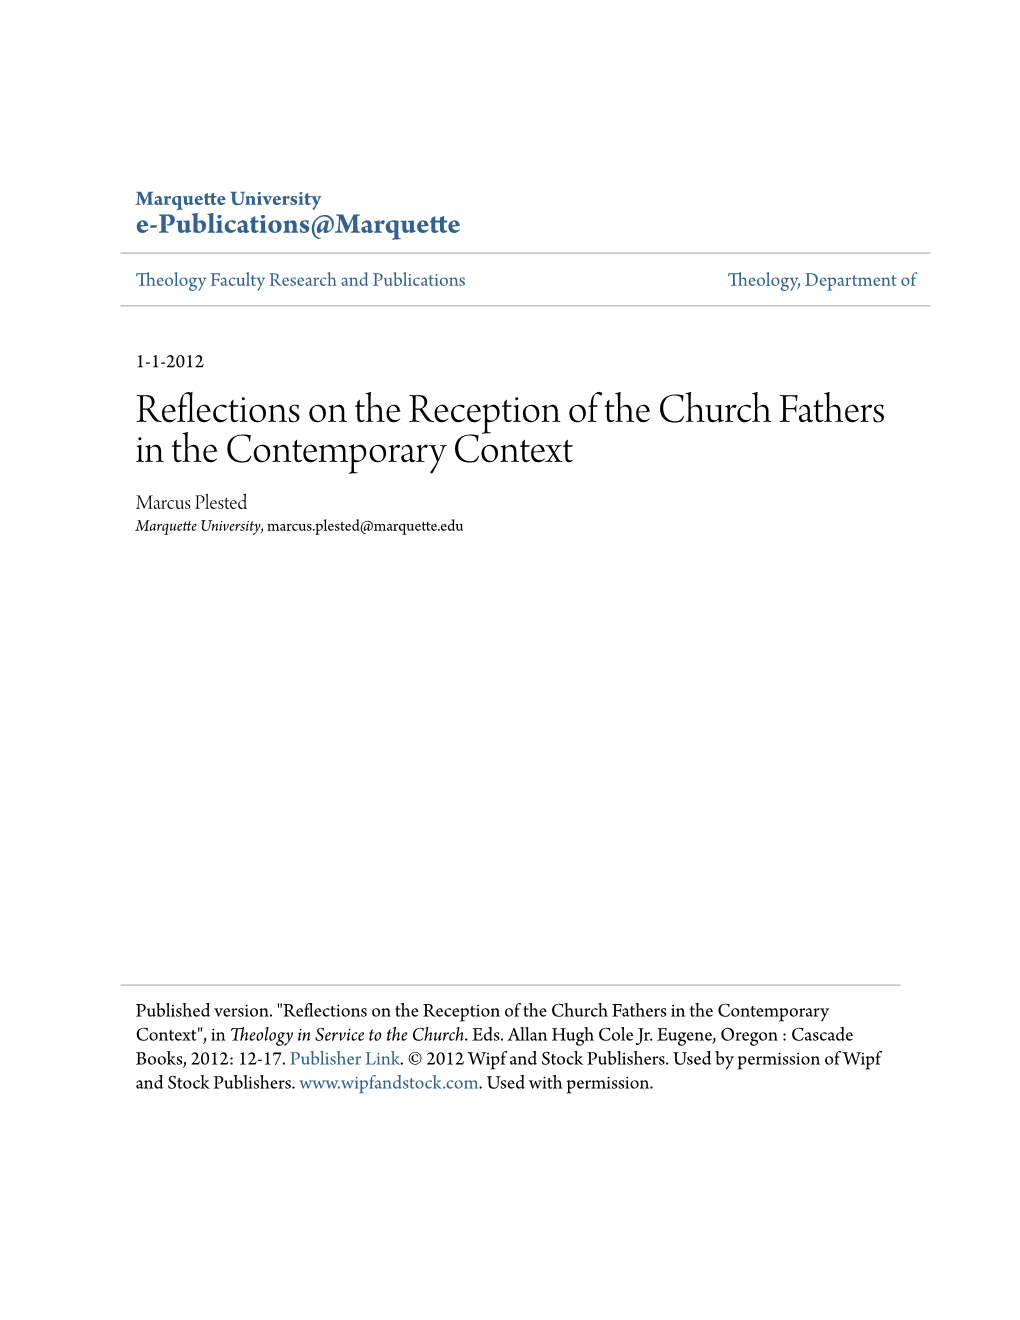 Reflections on the Reception of the Church Fathers in the Contemporary Context Marcus Plested Marquette University, Marcus.Plested@Marquette.Edu